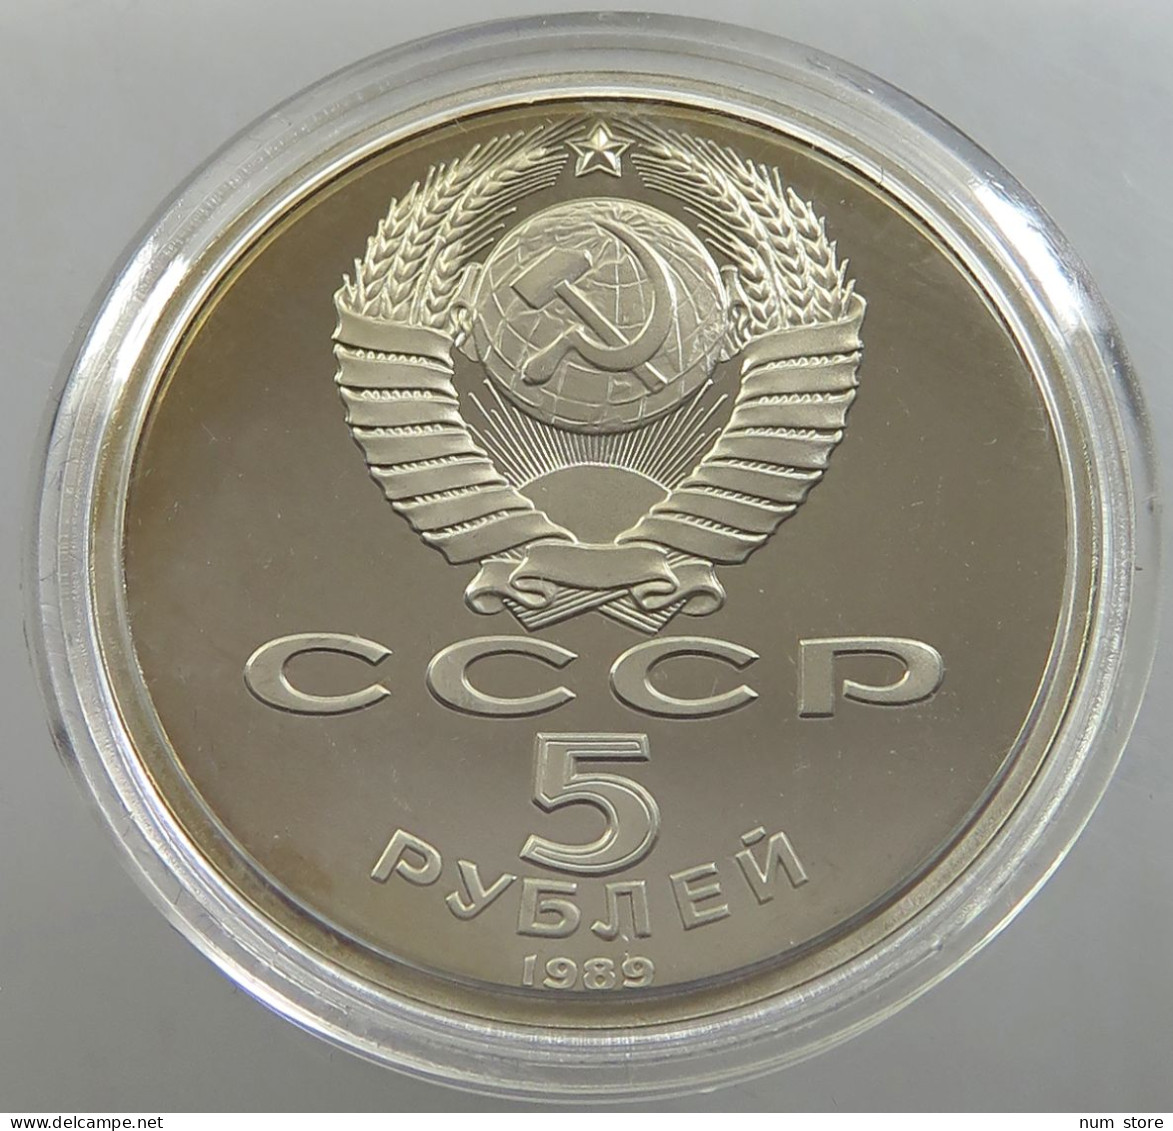 RUSSIA USSR 5 ROUBLES 1989 PROOF #sm14 0435 - Rusland